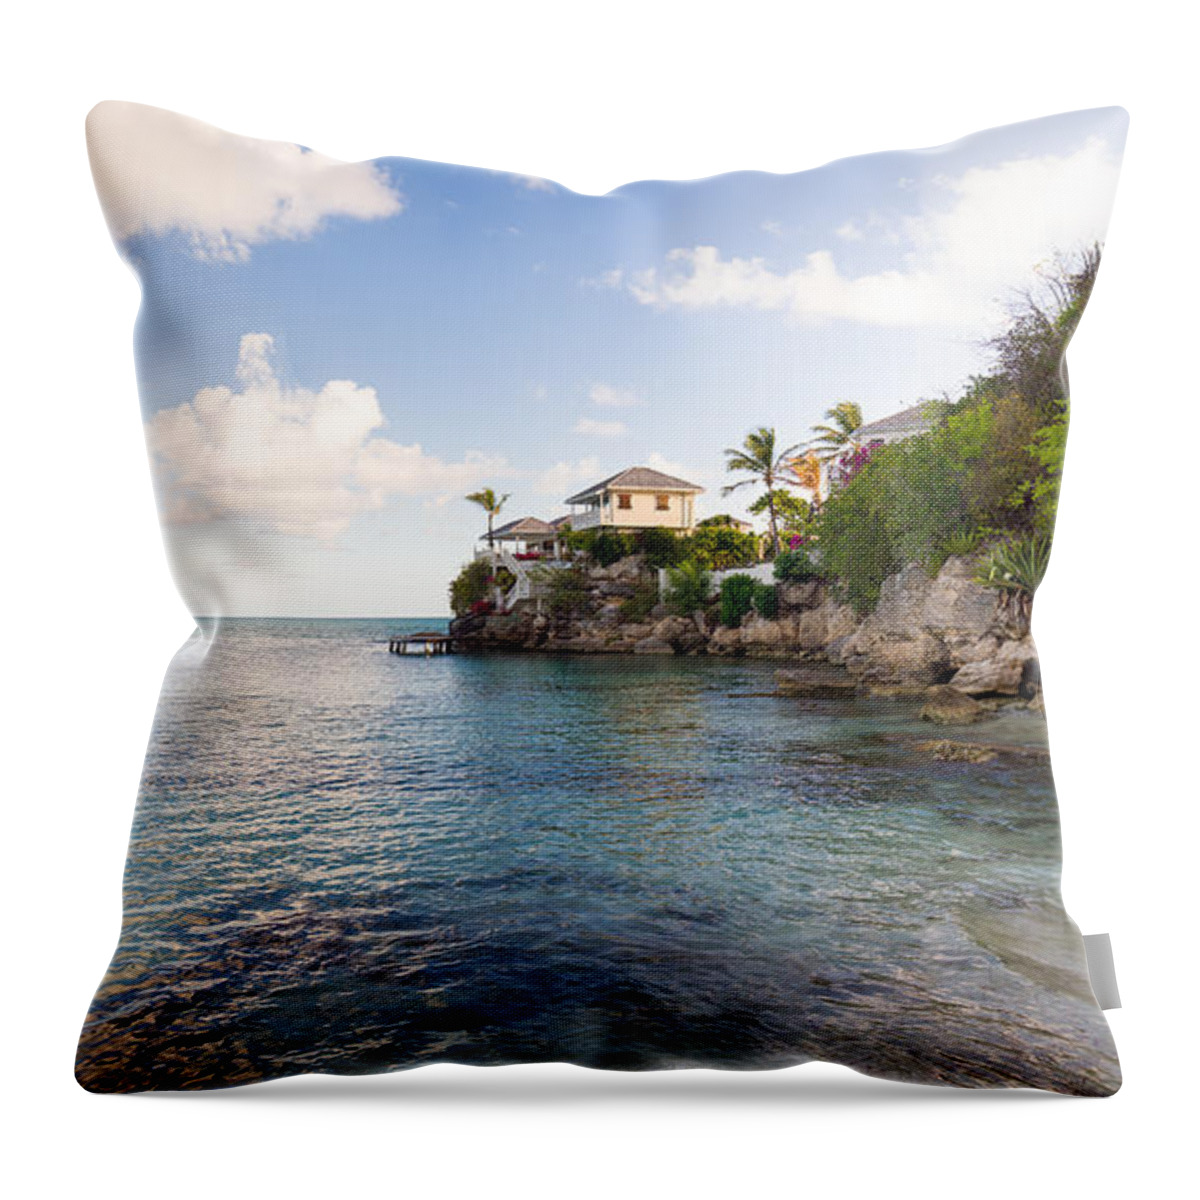 Antigua And Barbuda Throw Pillow featuring the photograph Rock Cottage by Ferry Zievinger